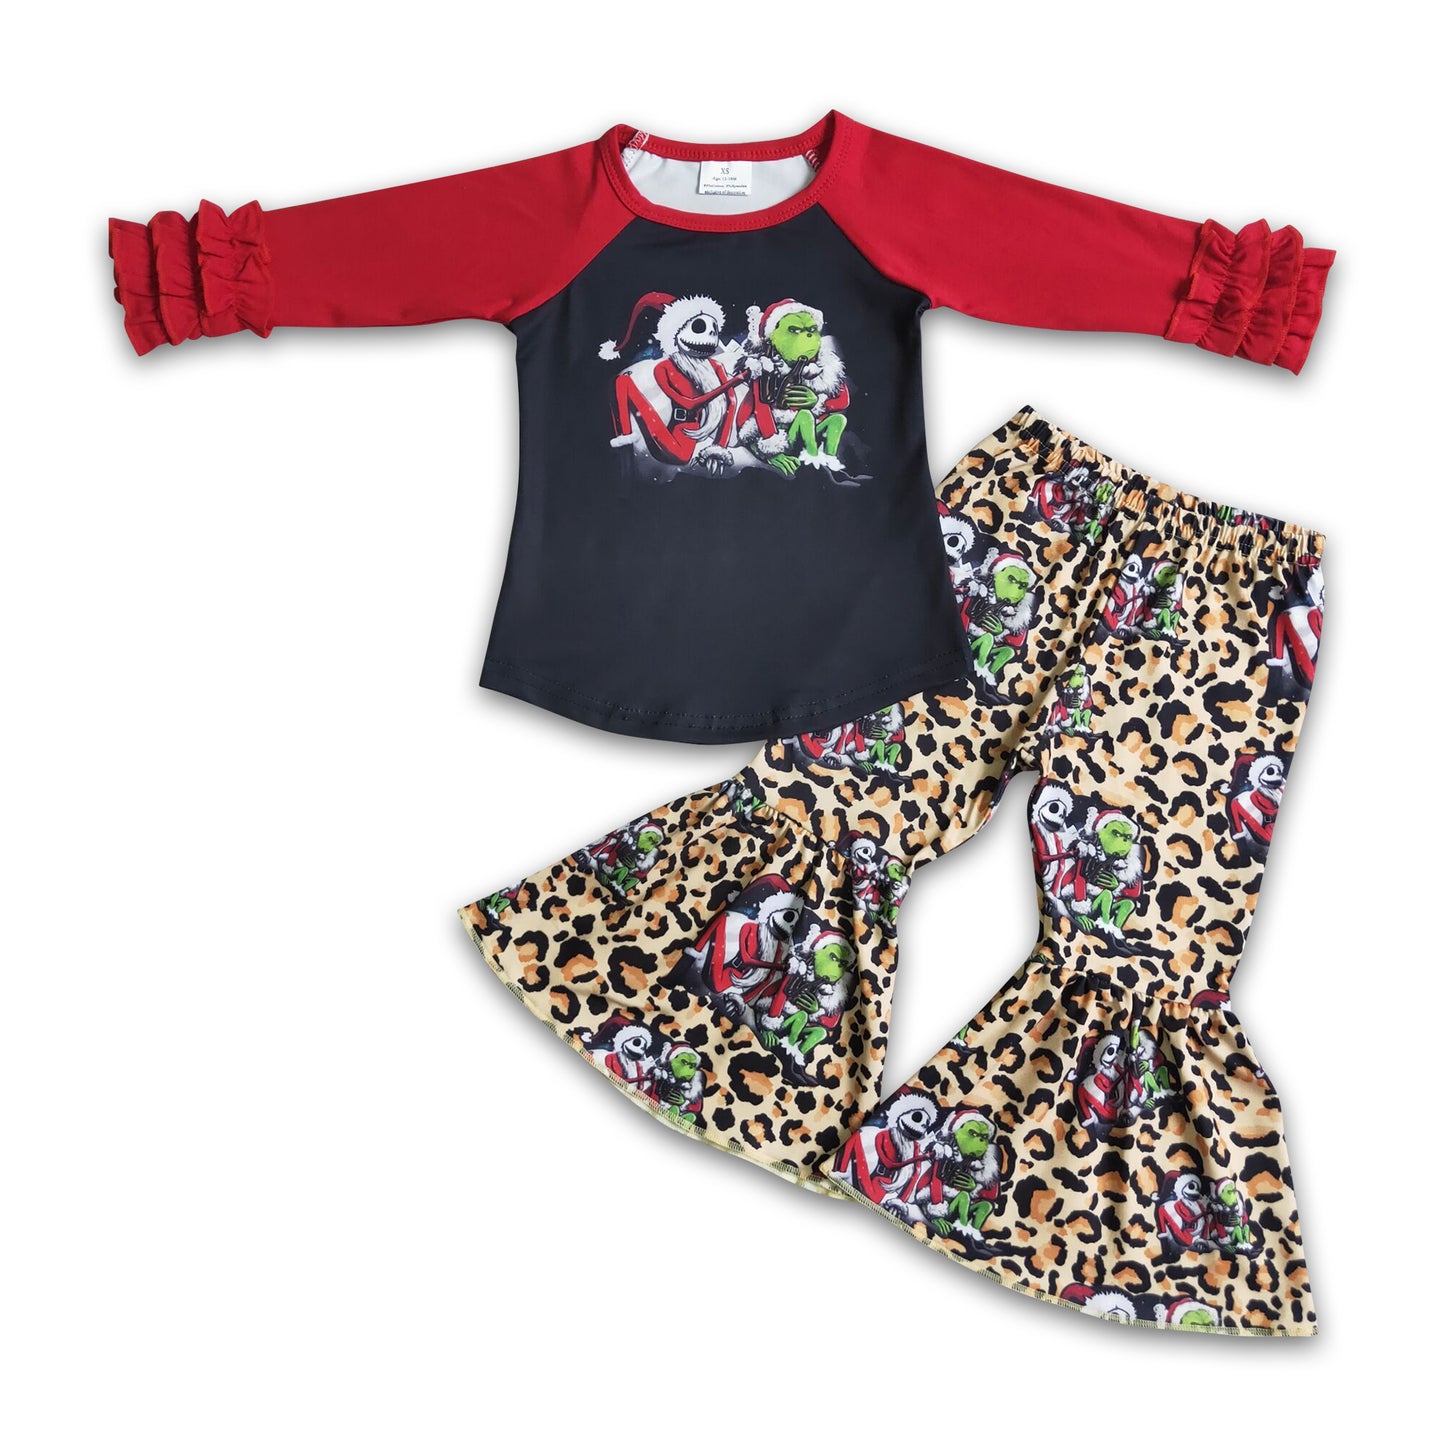 Red long sleeve green face shirt leopard pants girls Christmas outfits